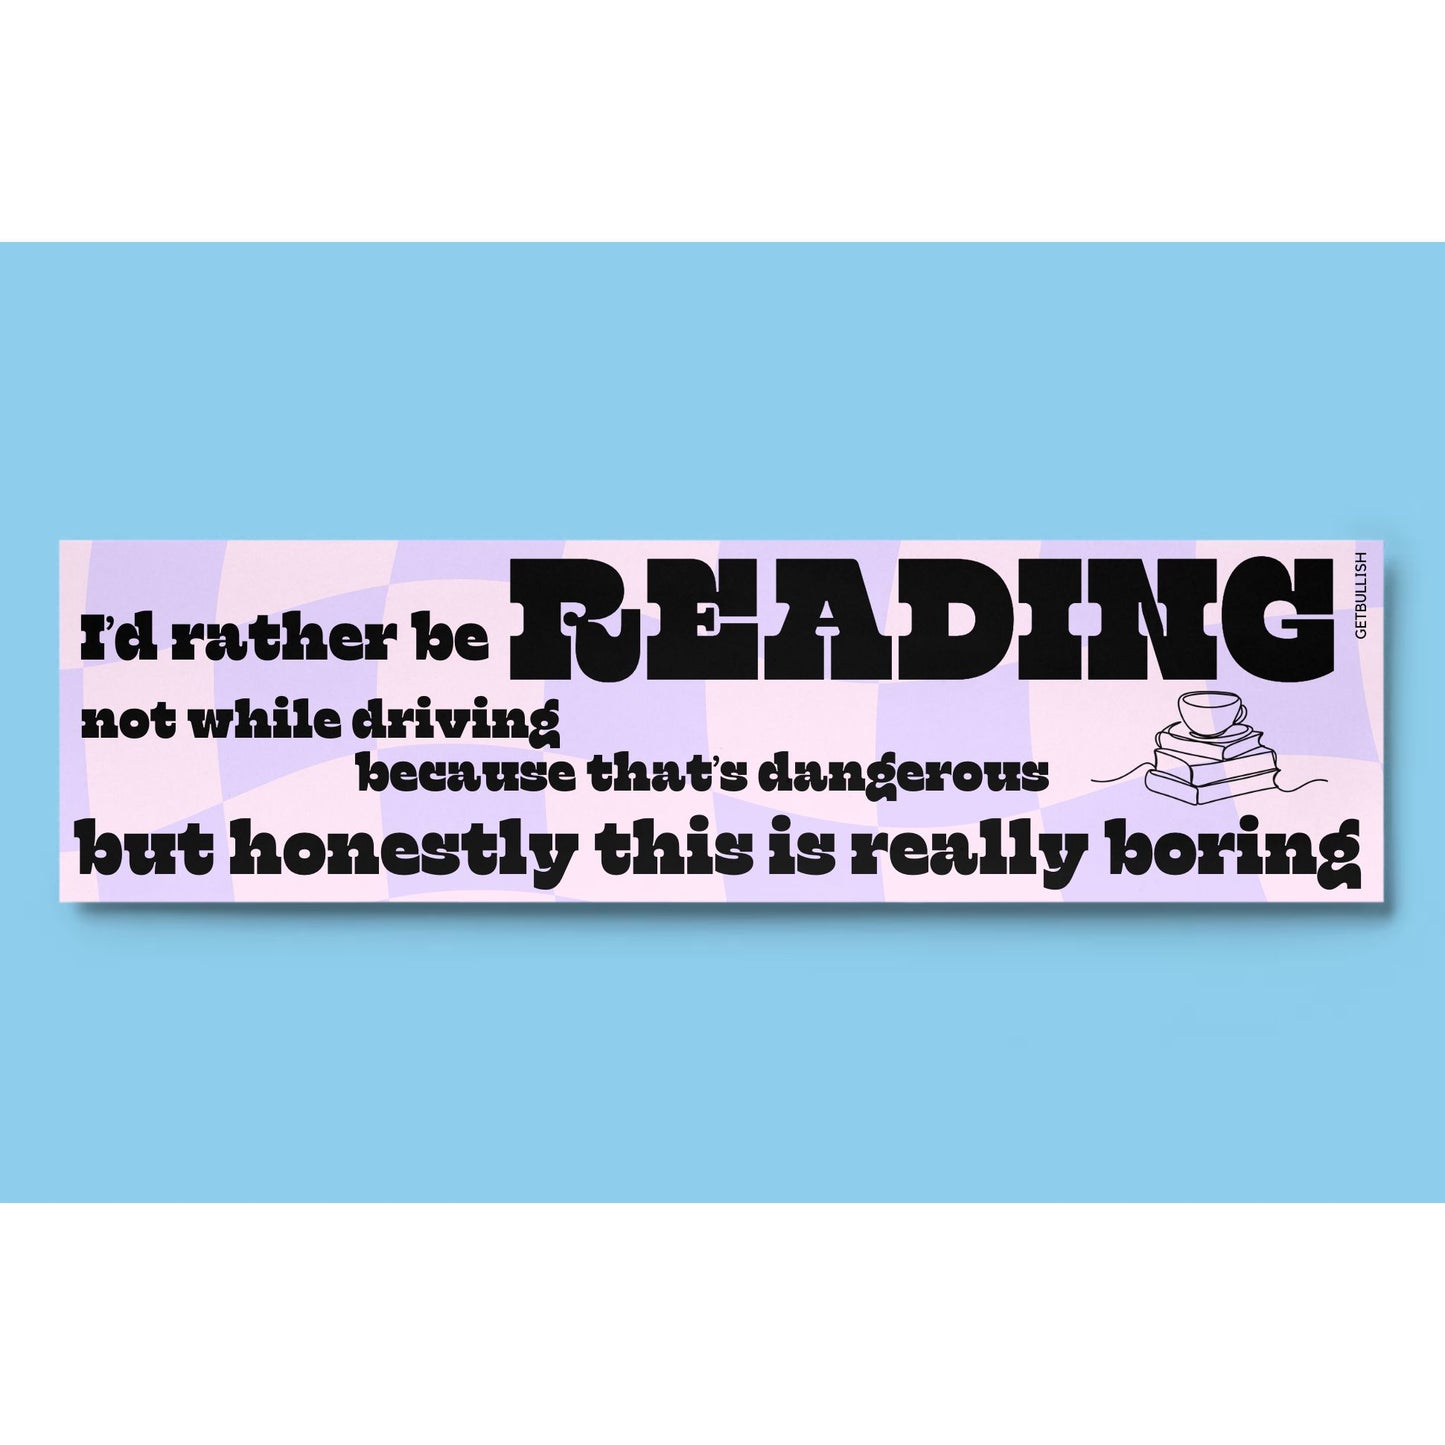 I'd Rather Be Reading Not While Driving Bumper Sticker